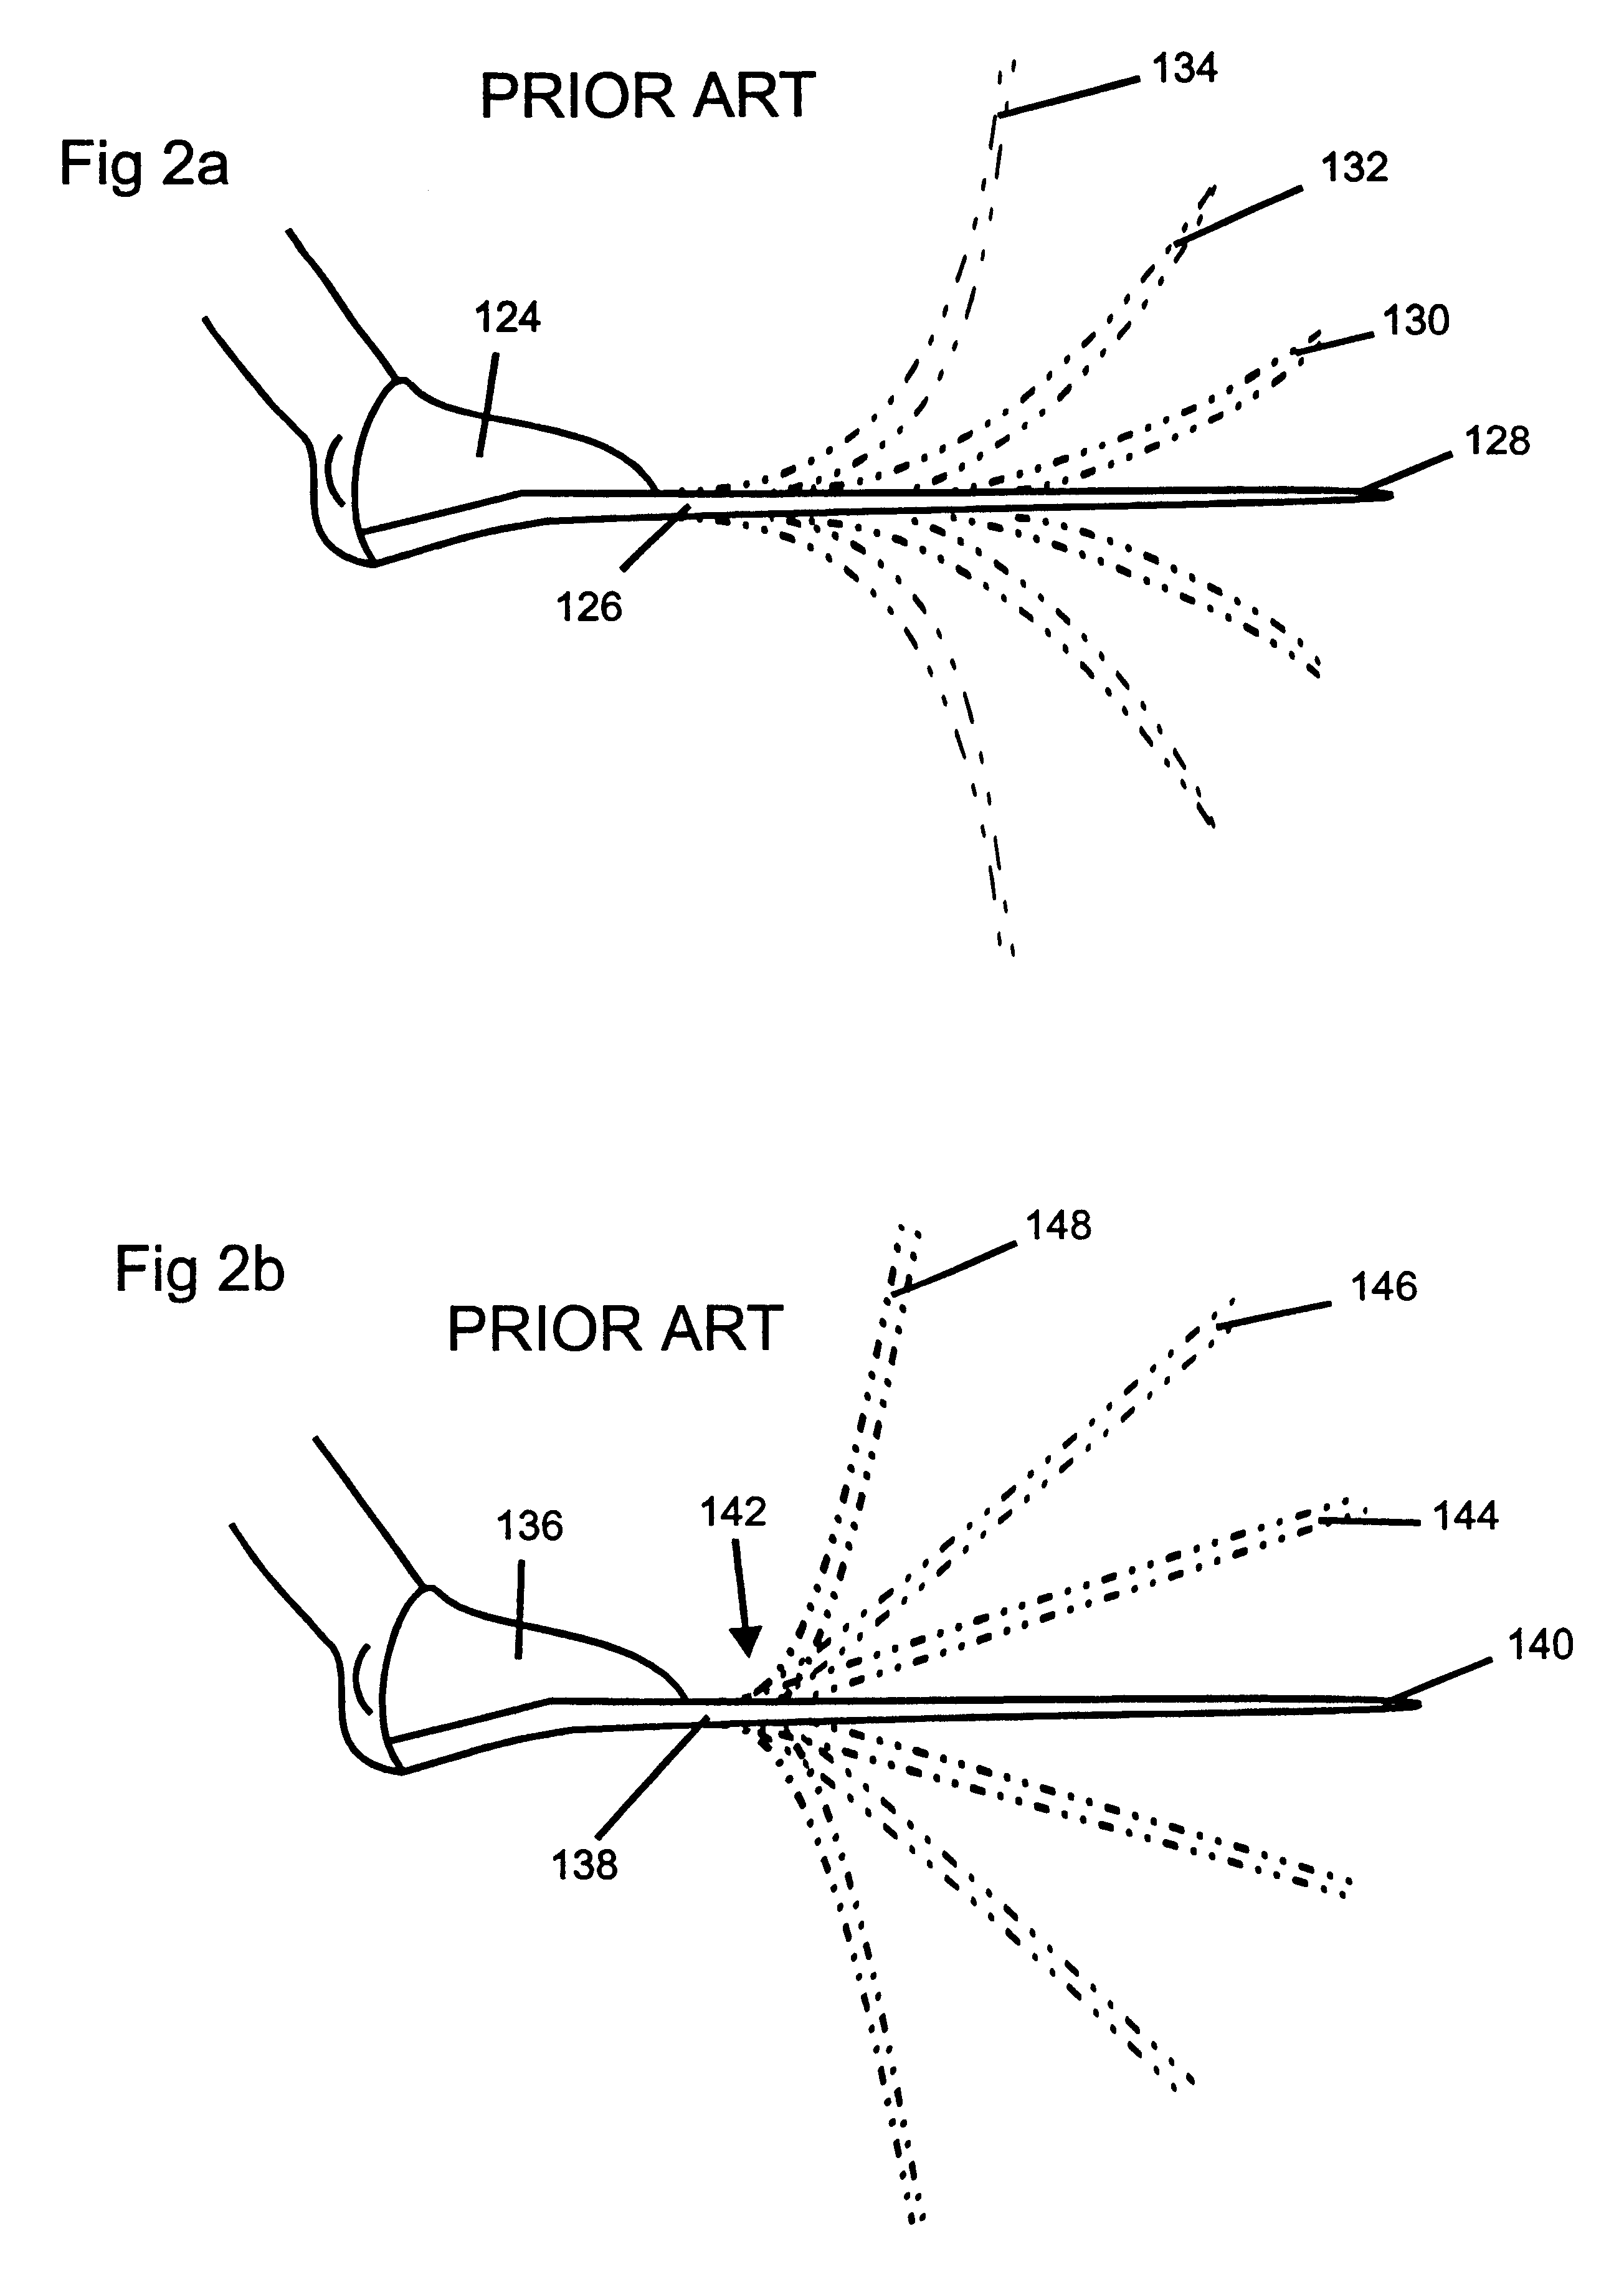 Methods for creating consistent large scale blade deflections